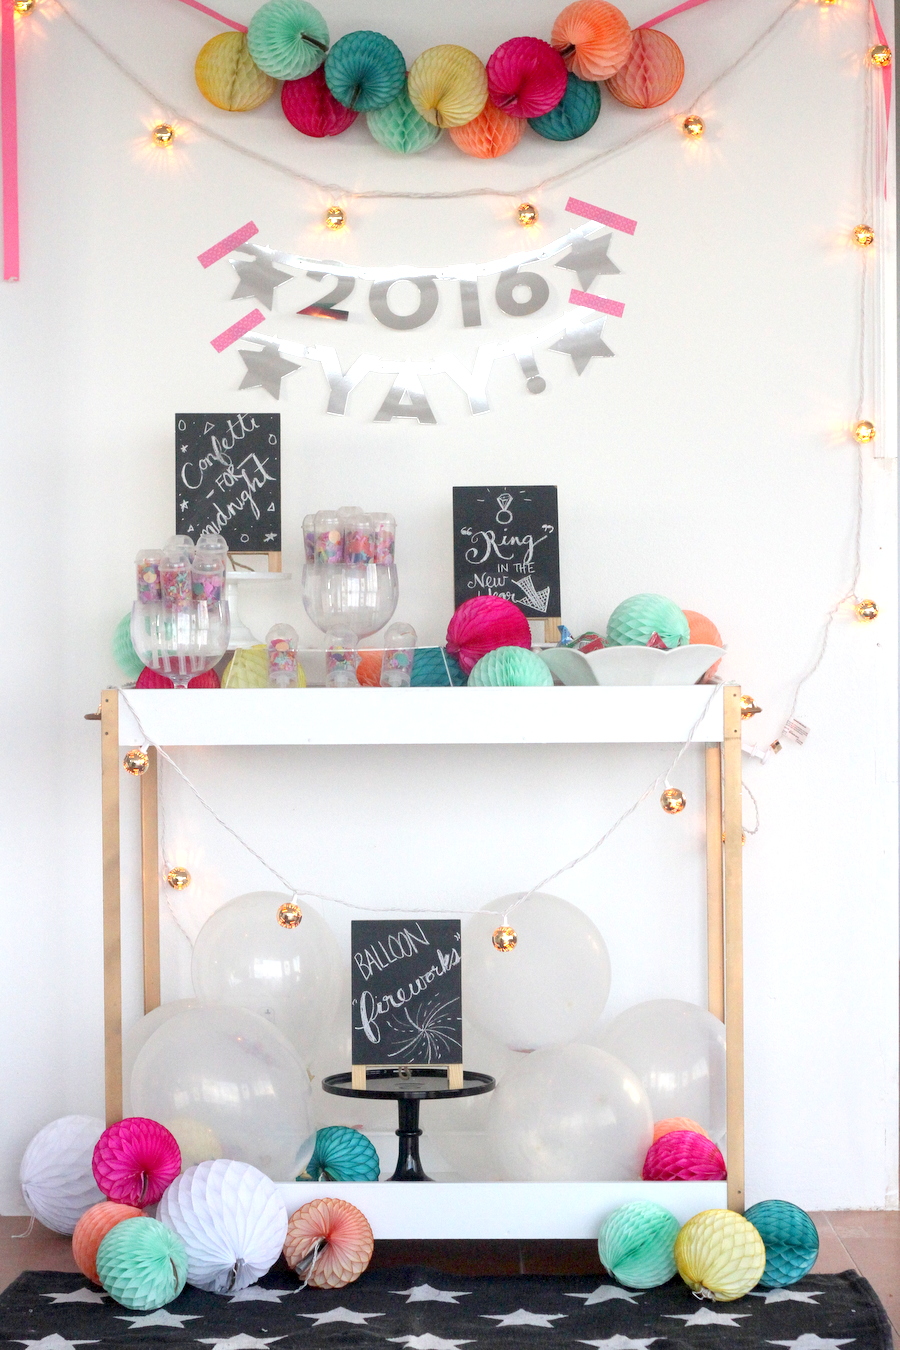 Easy New Year's Party ideas (and a confetti bar!)